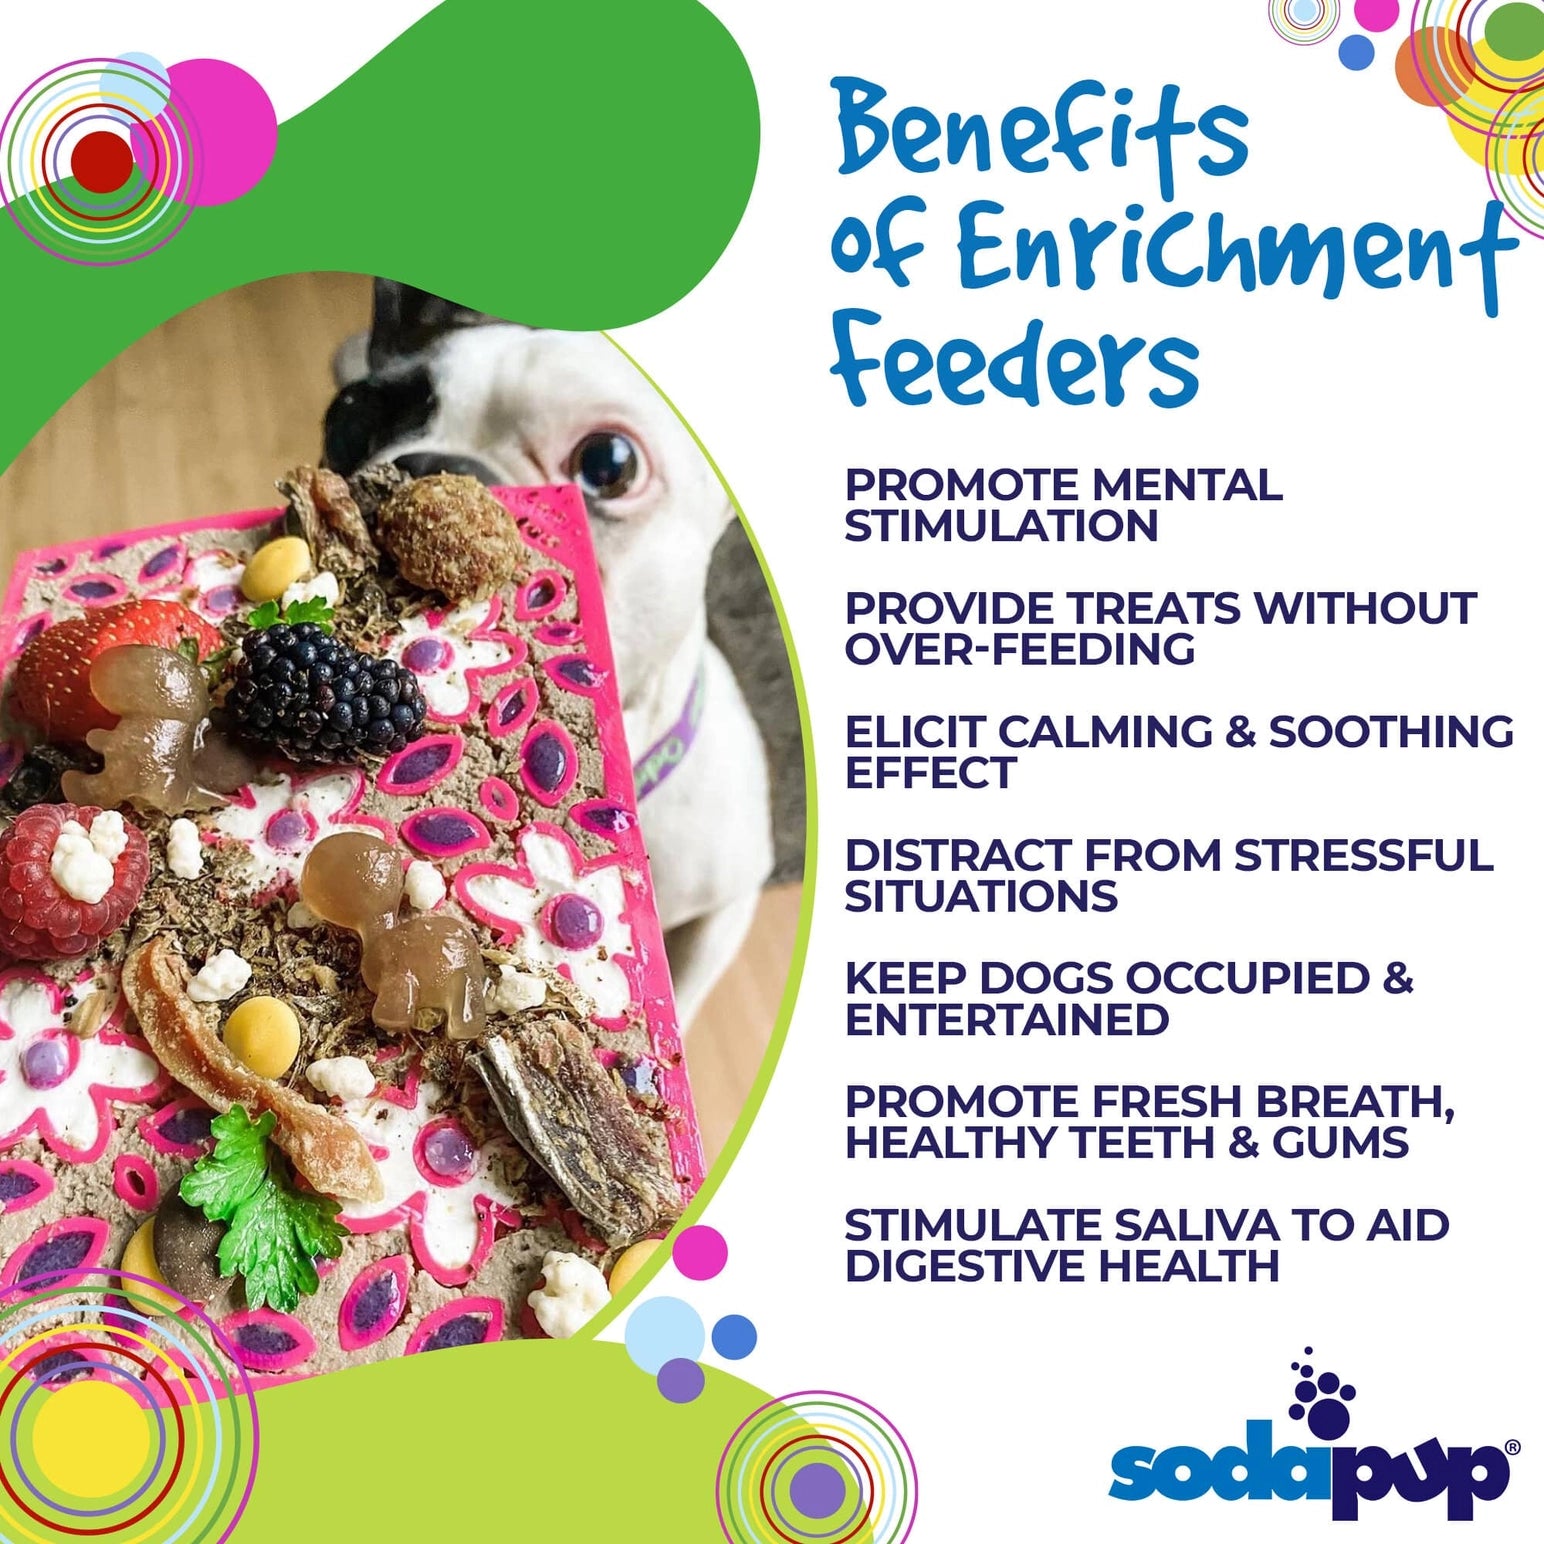 Benefits of Enrichment Feeders Promote Mental Stimulation Provide Treats Without Over-Feeding Elicit Calming & Soothing Effect Distract from Stressful Situations Keep Dogs Occupied and Entertained Promote Fresh Breath, Healthy Teeth & Gums Stimulate Saliva to Aid Digestive Health